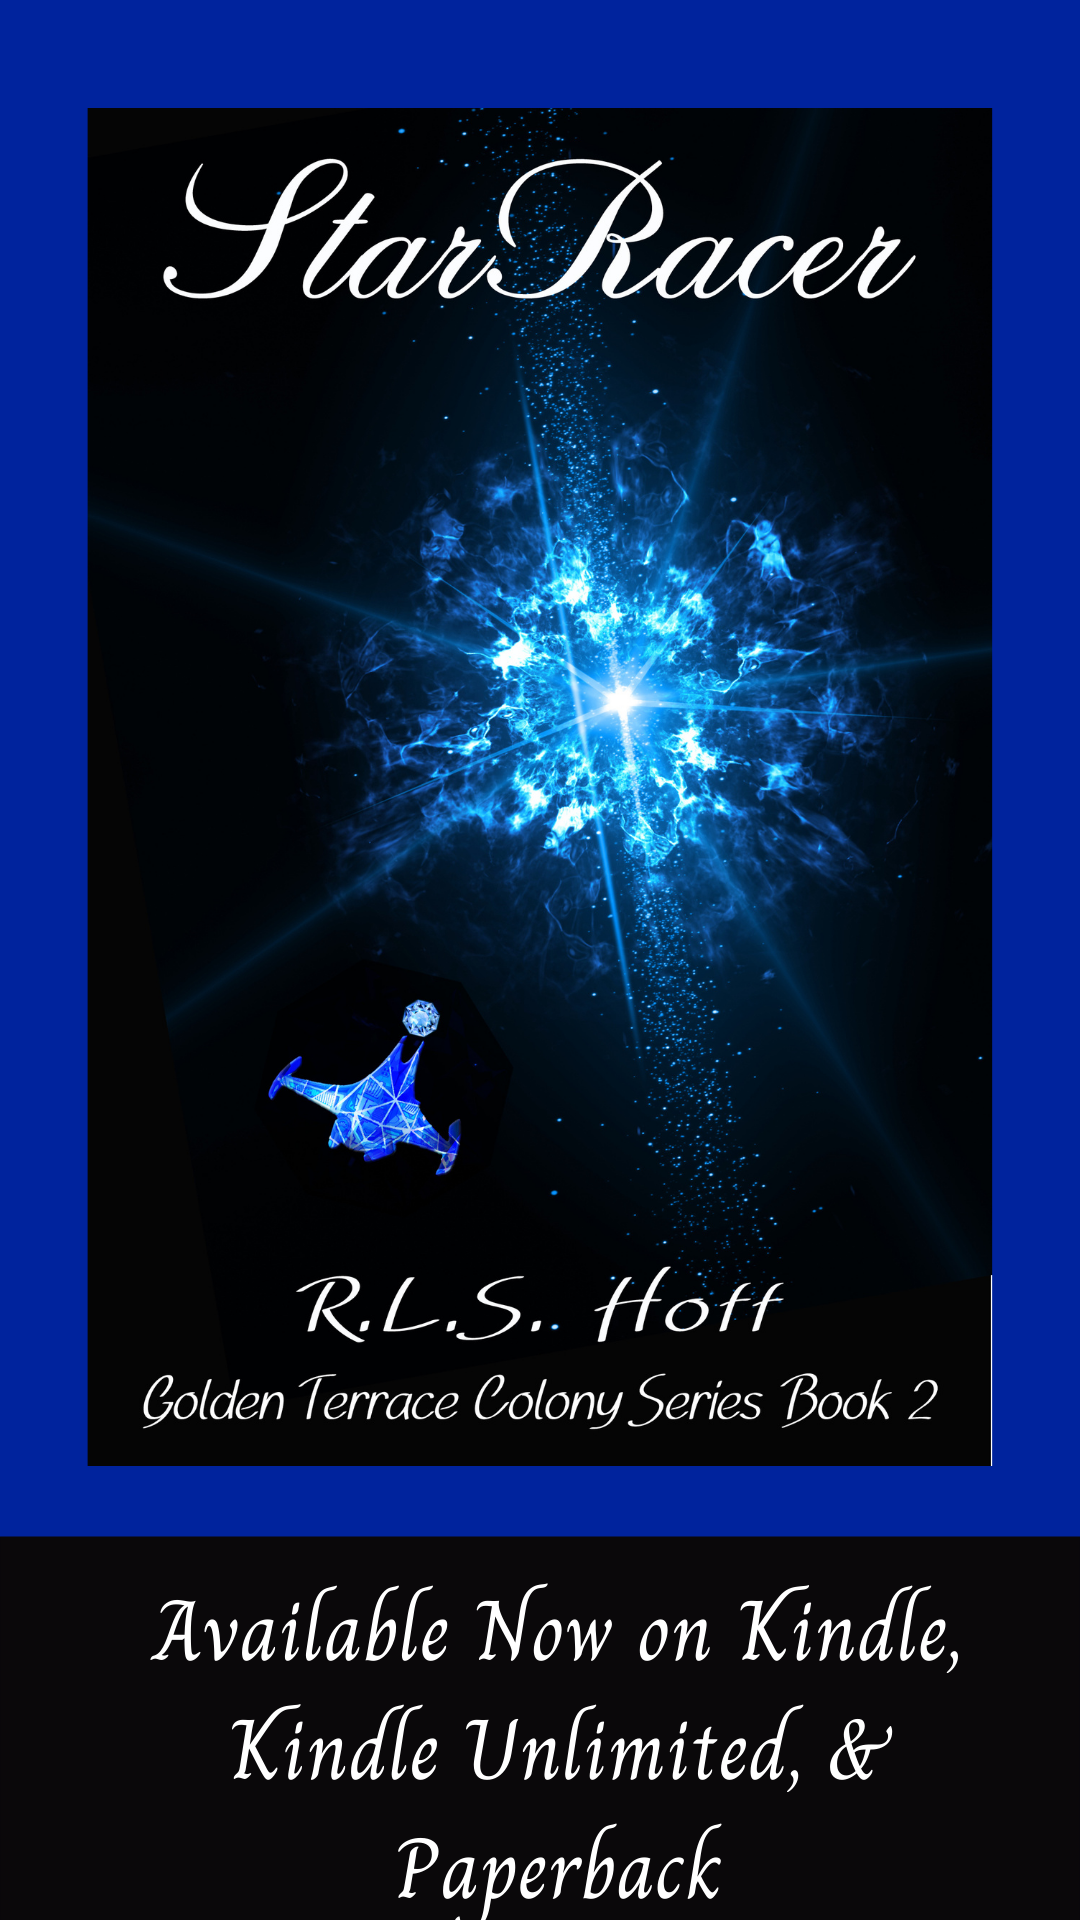 The cover of StarRacer sits on a blue background above the words "Available now on Kindle, Kindle Unlimited, & Paperback. The Cover of StarRacer shows a blue crystalline starship heading toward a blue explosion of light above the words R. L. S. Hoff and Golden Terrace Coloiny Series Book 2